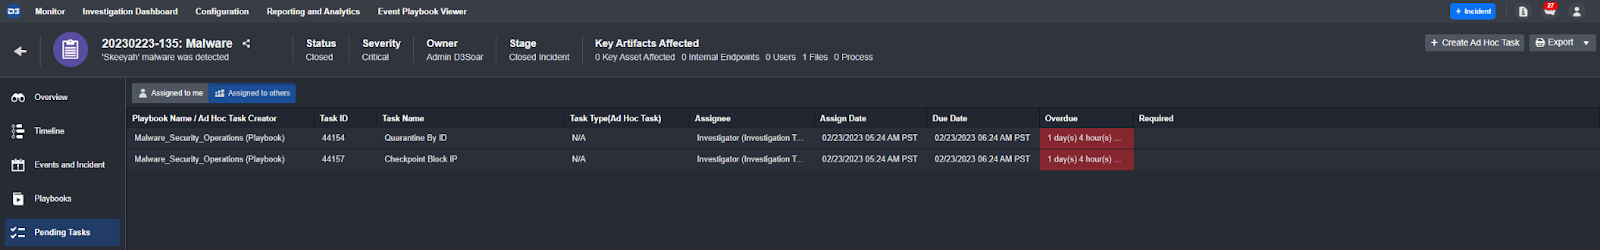 D3 Smart SOAR's pending task tab in the incident overview section